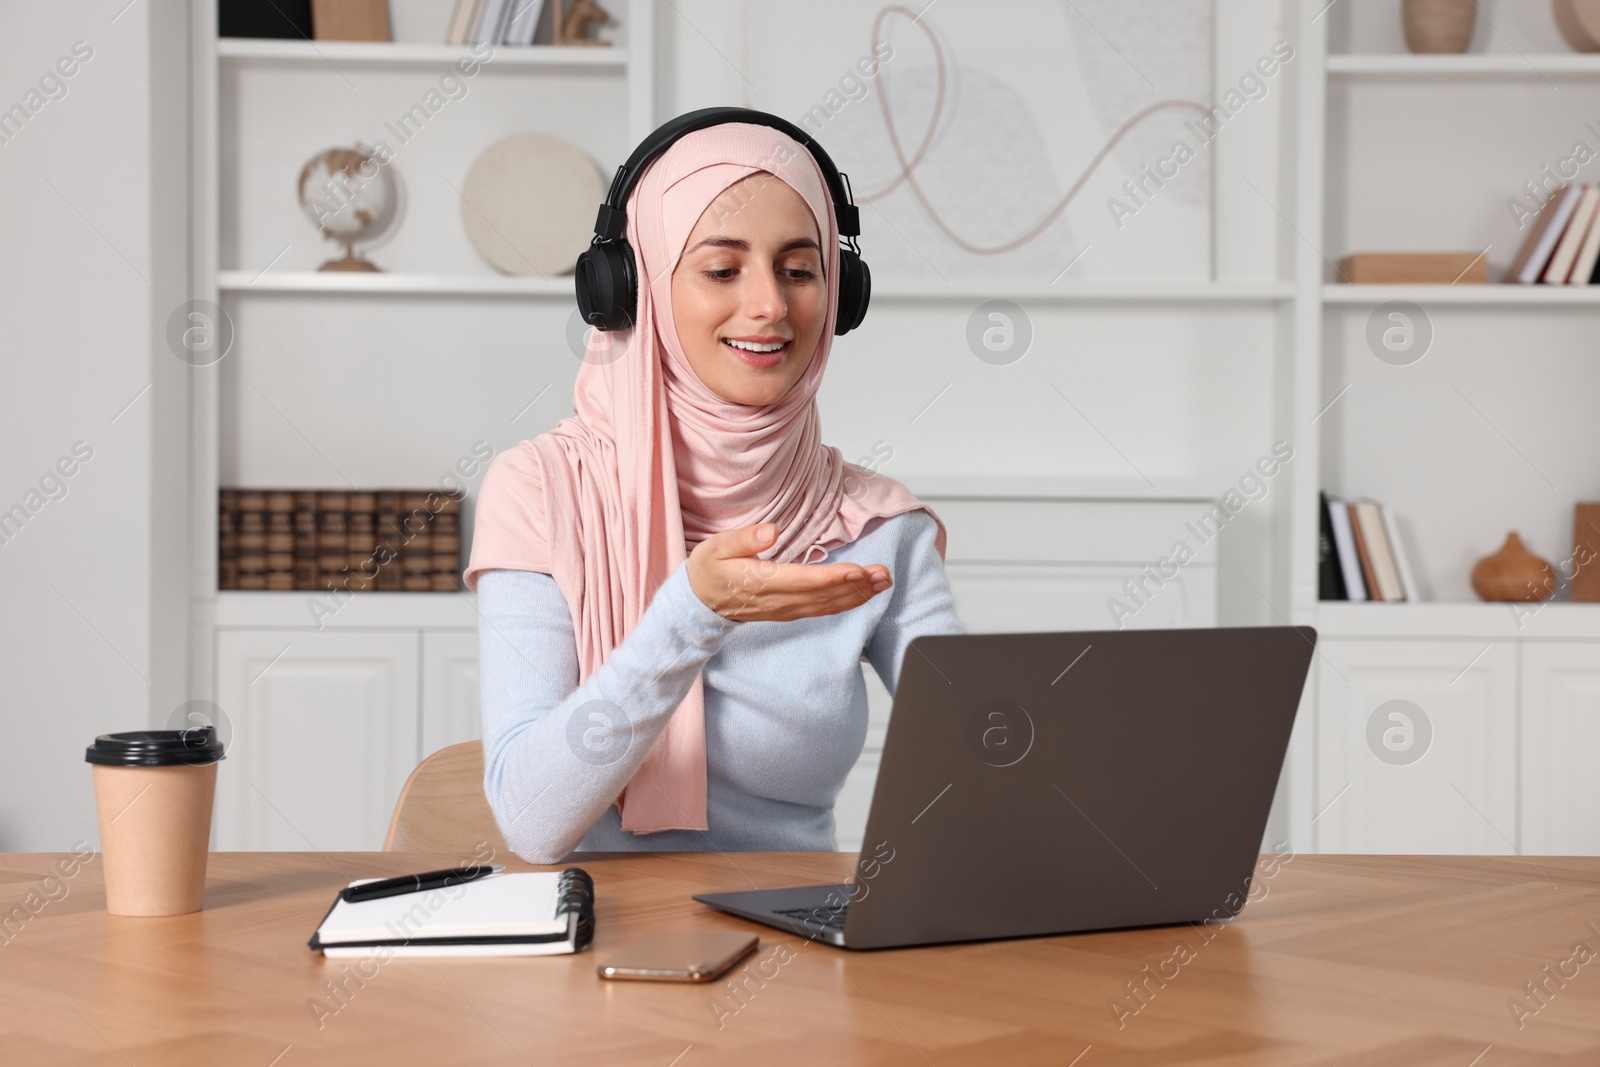 Photo of Muslim woman in hijab using video chat on laptop at wooden table in room